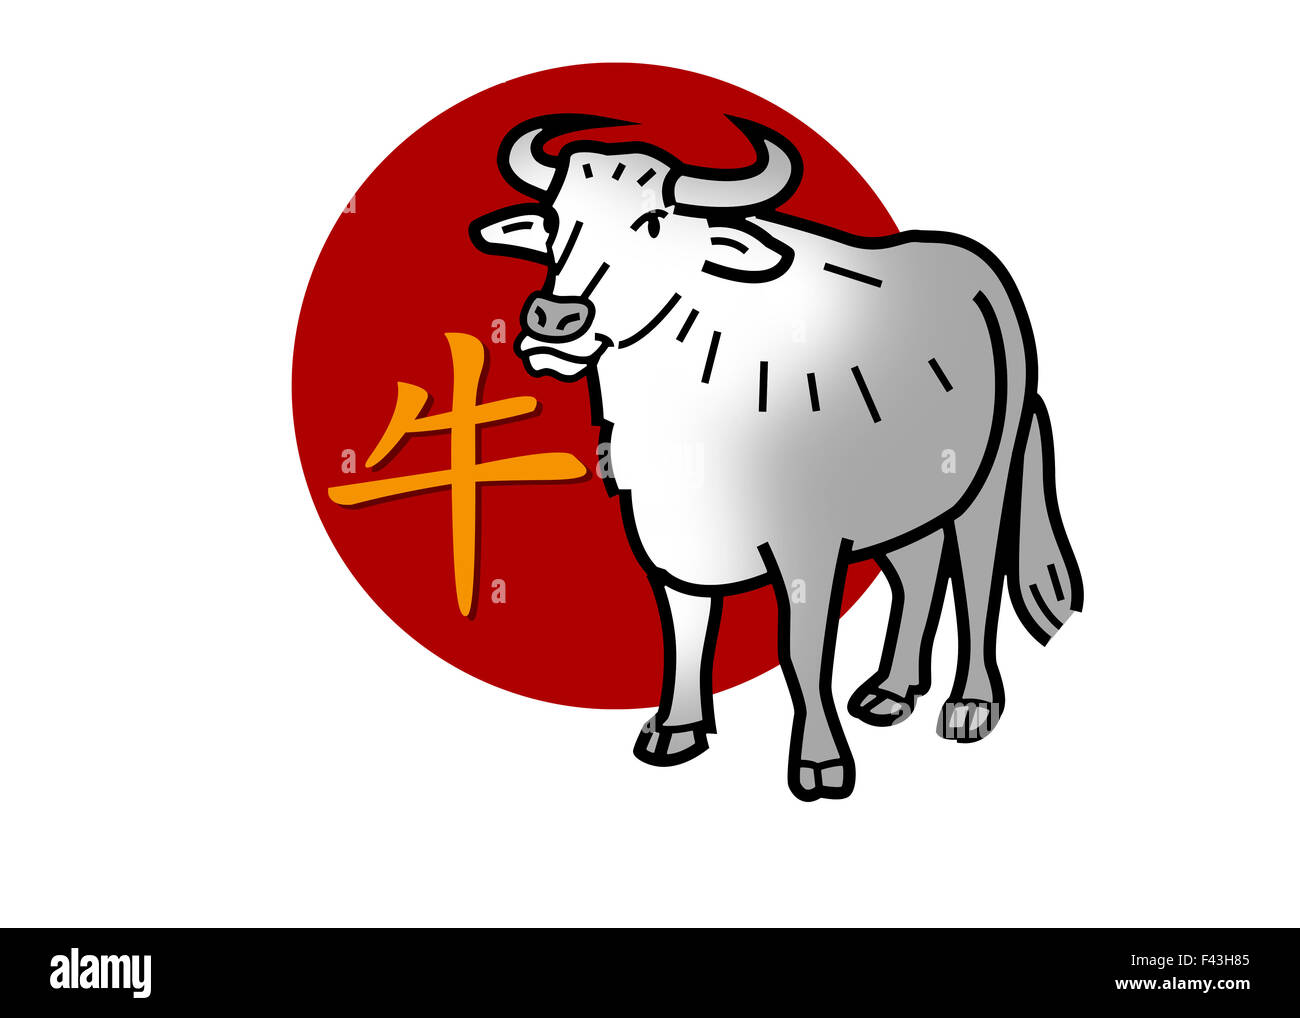 Chinese zodiac sign for year of the ox Stock Photo - Alamy